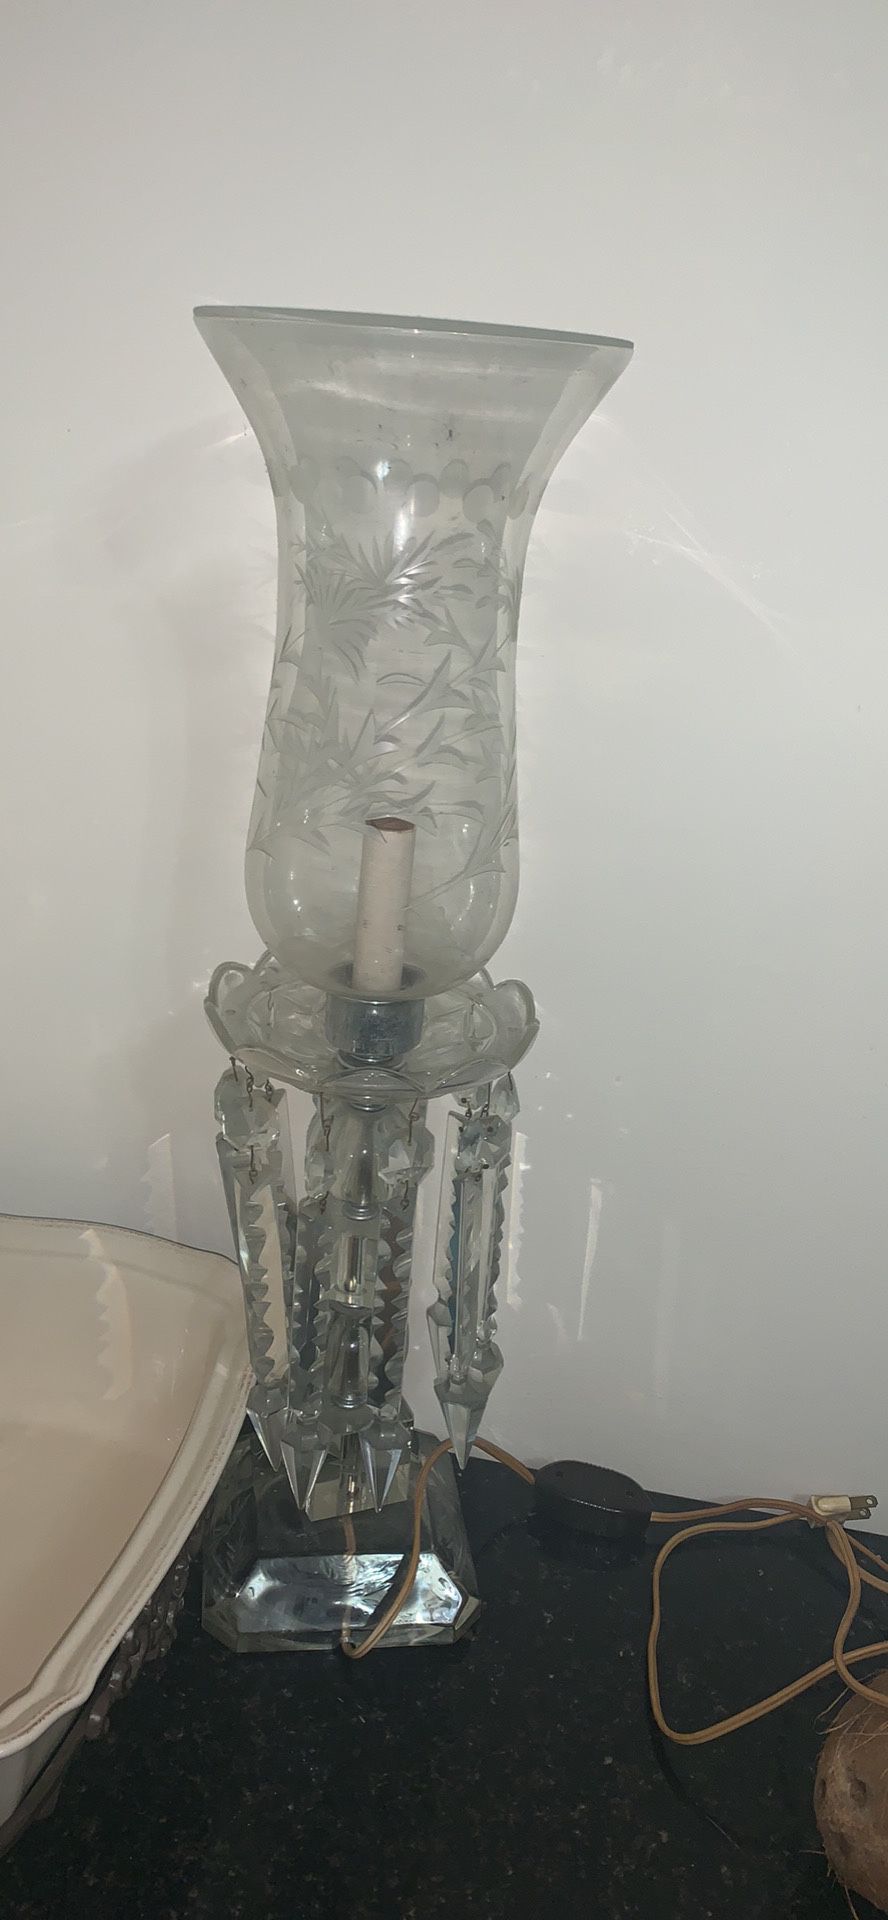 Lamp works perfectly!!! Heavy crystal hanging antique